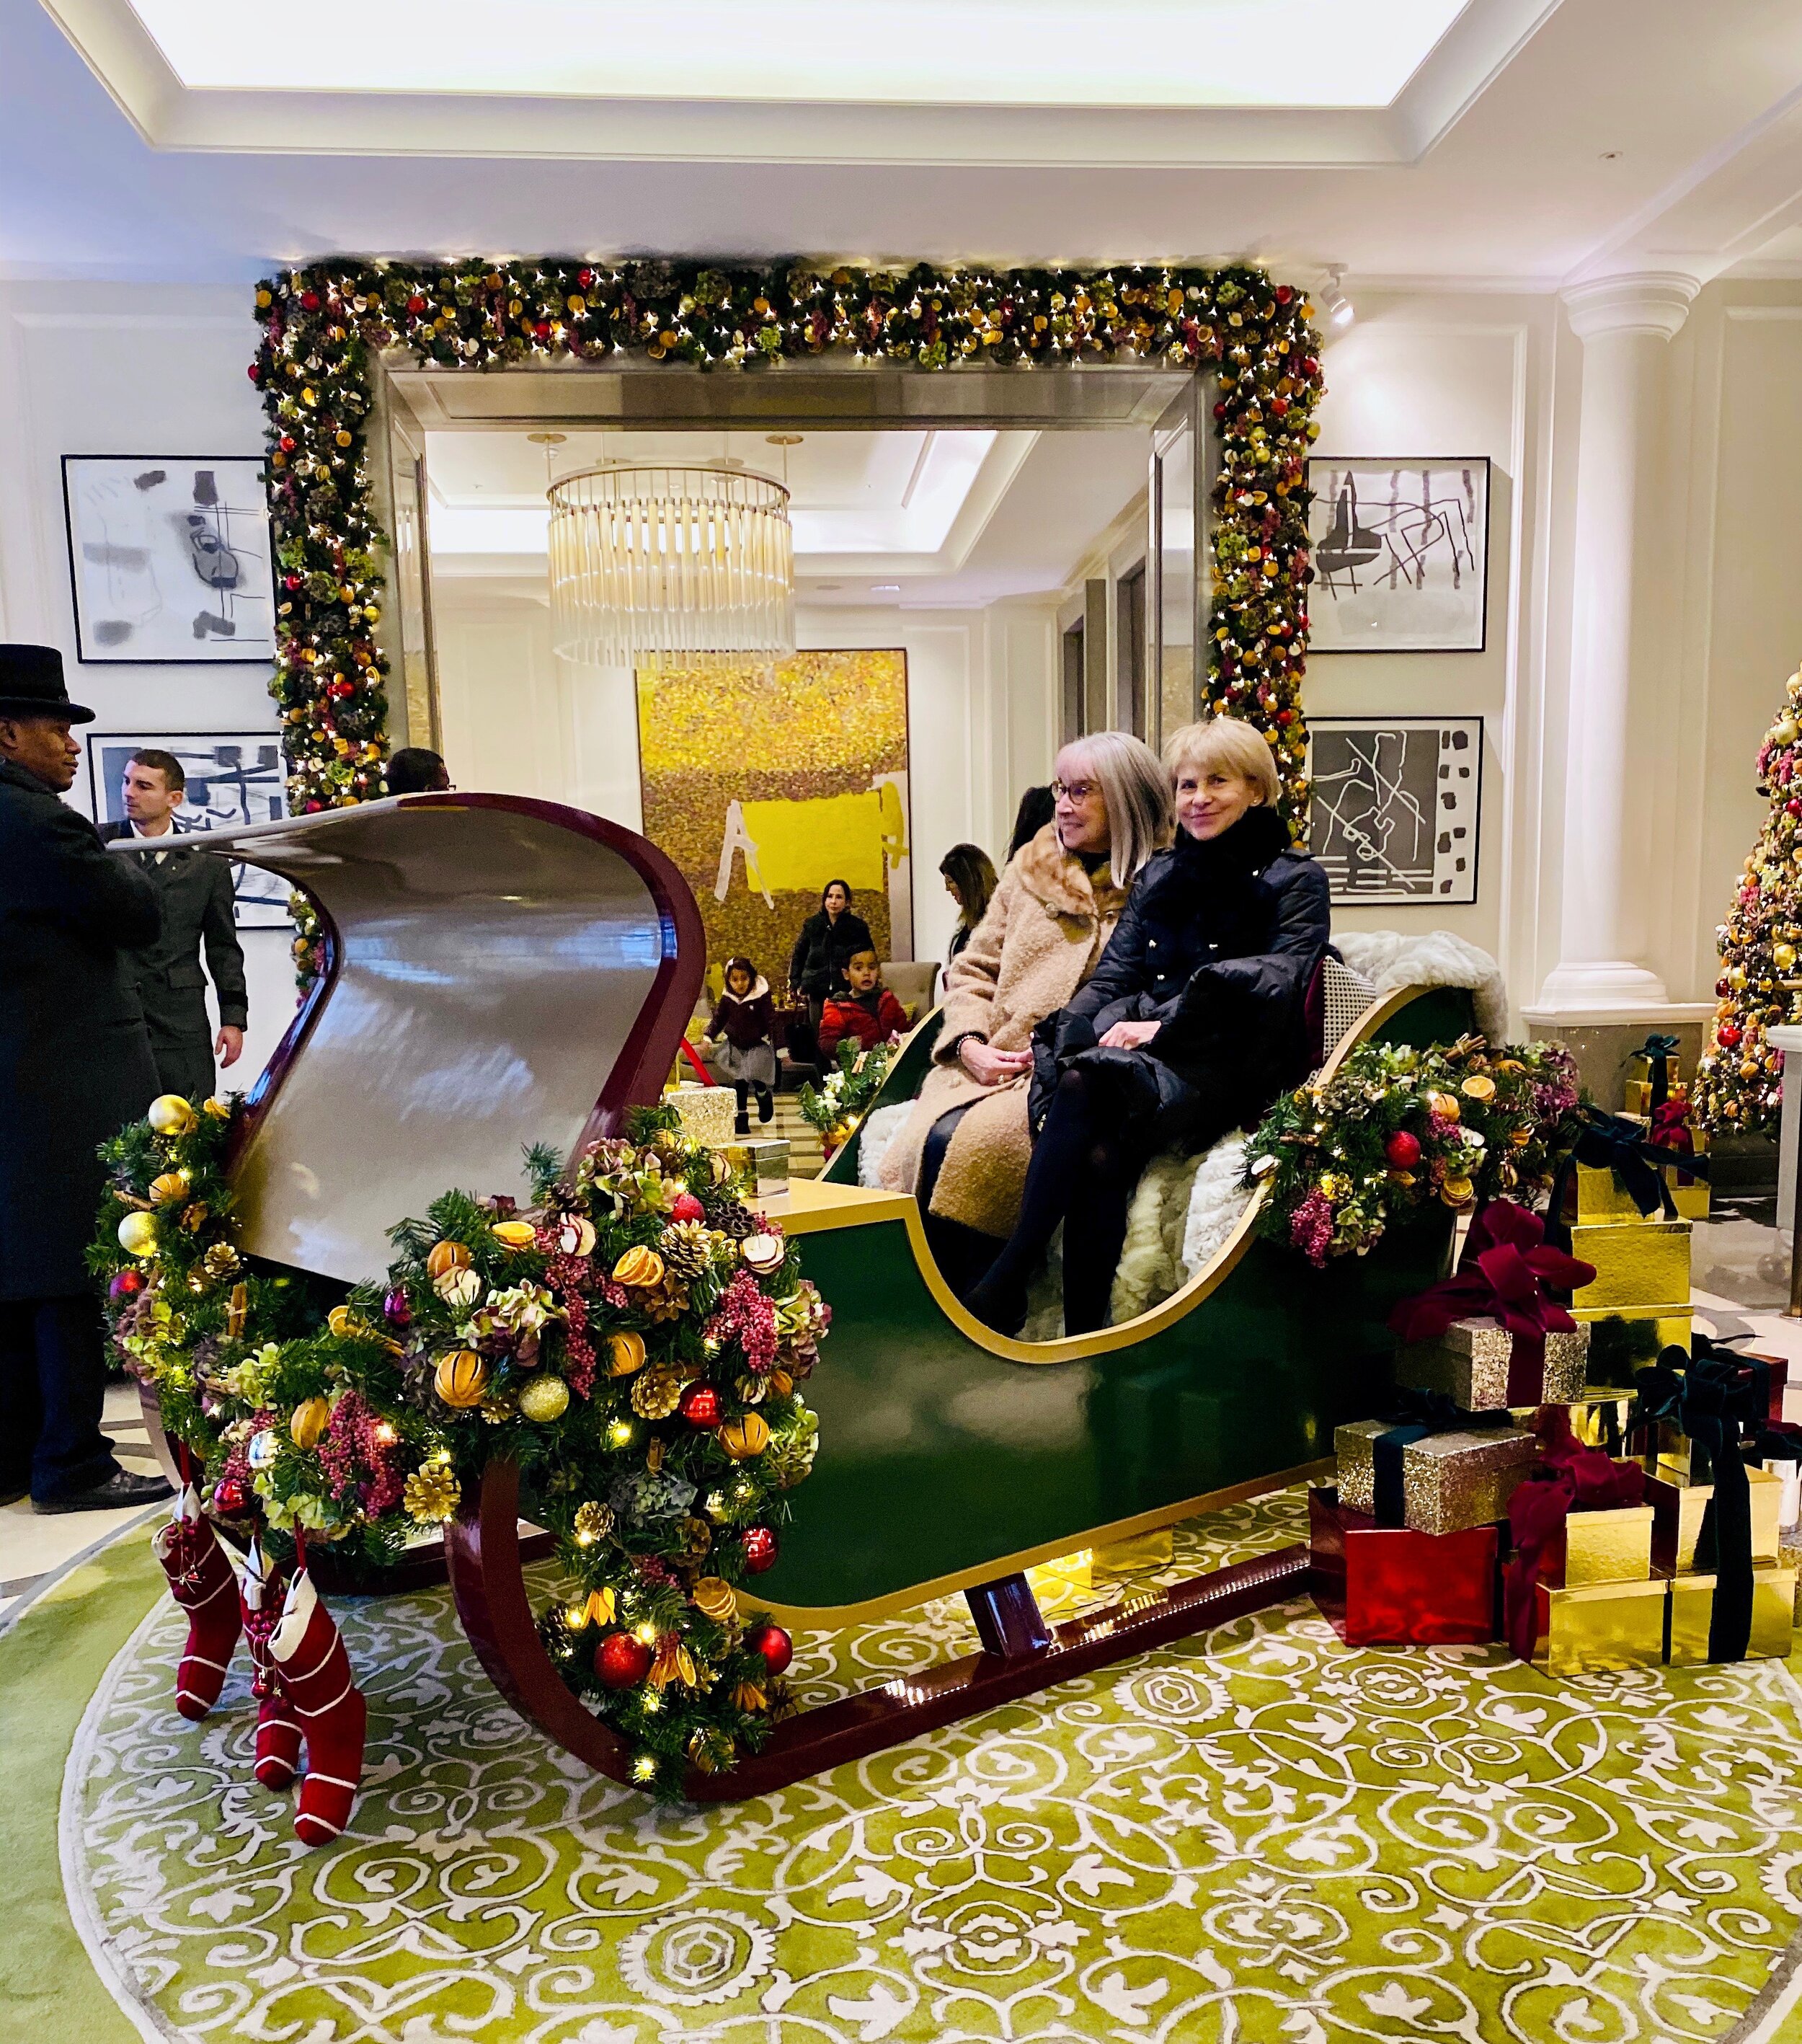 The gorgeously Xmas sleigh in the foyer.